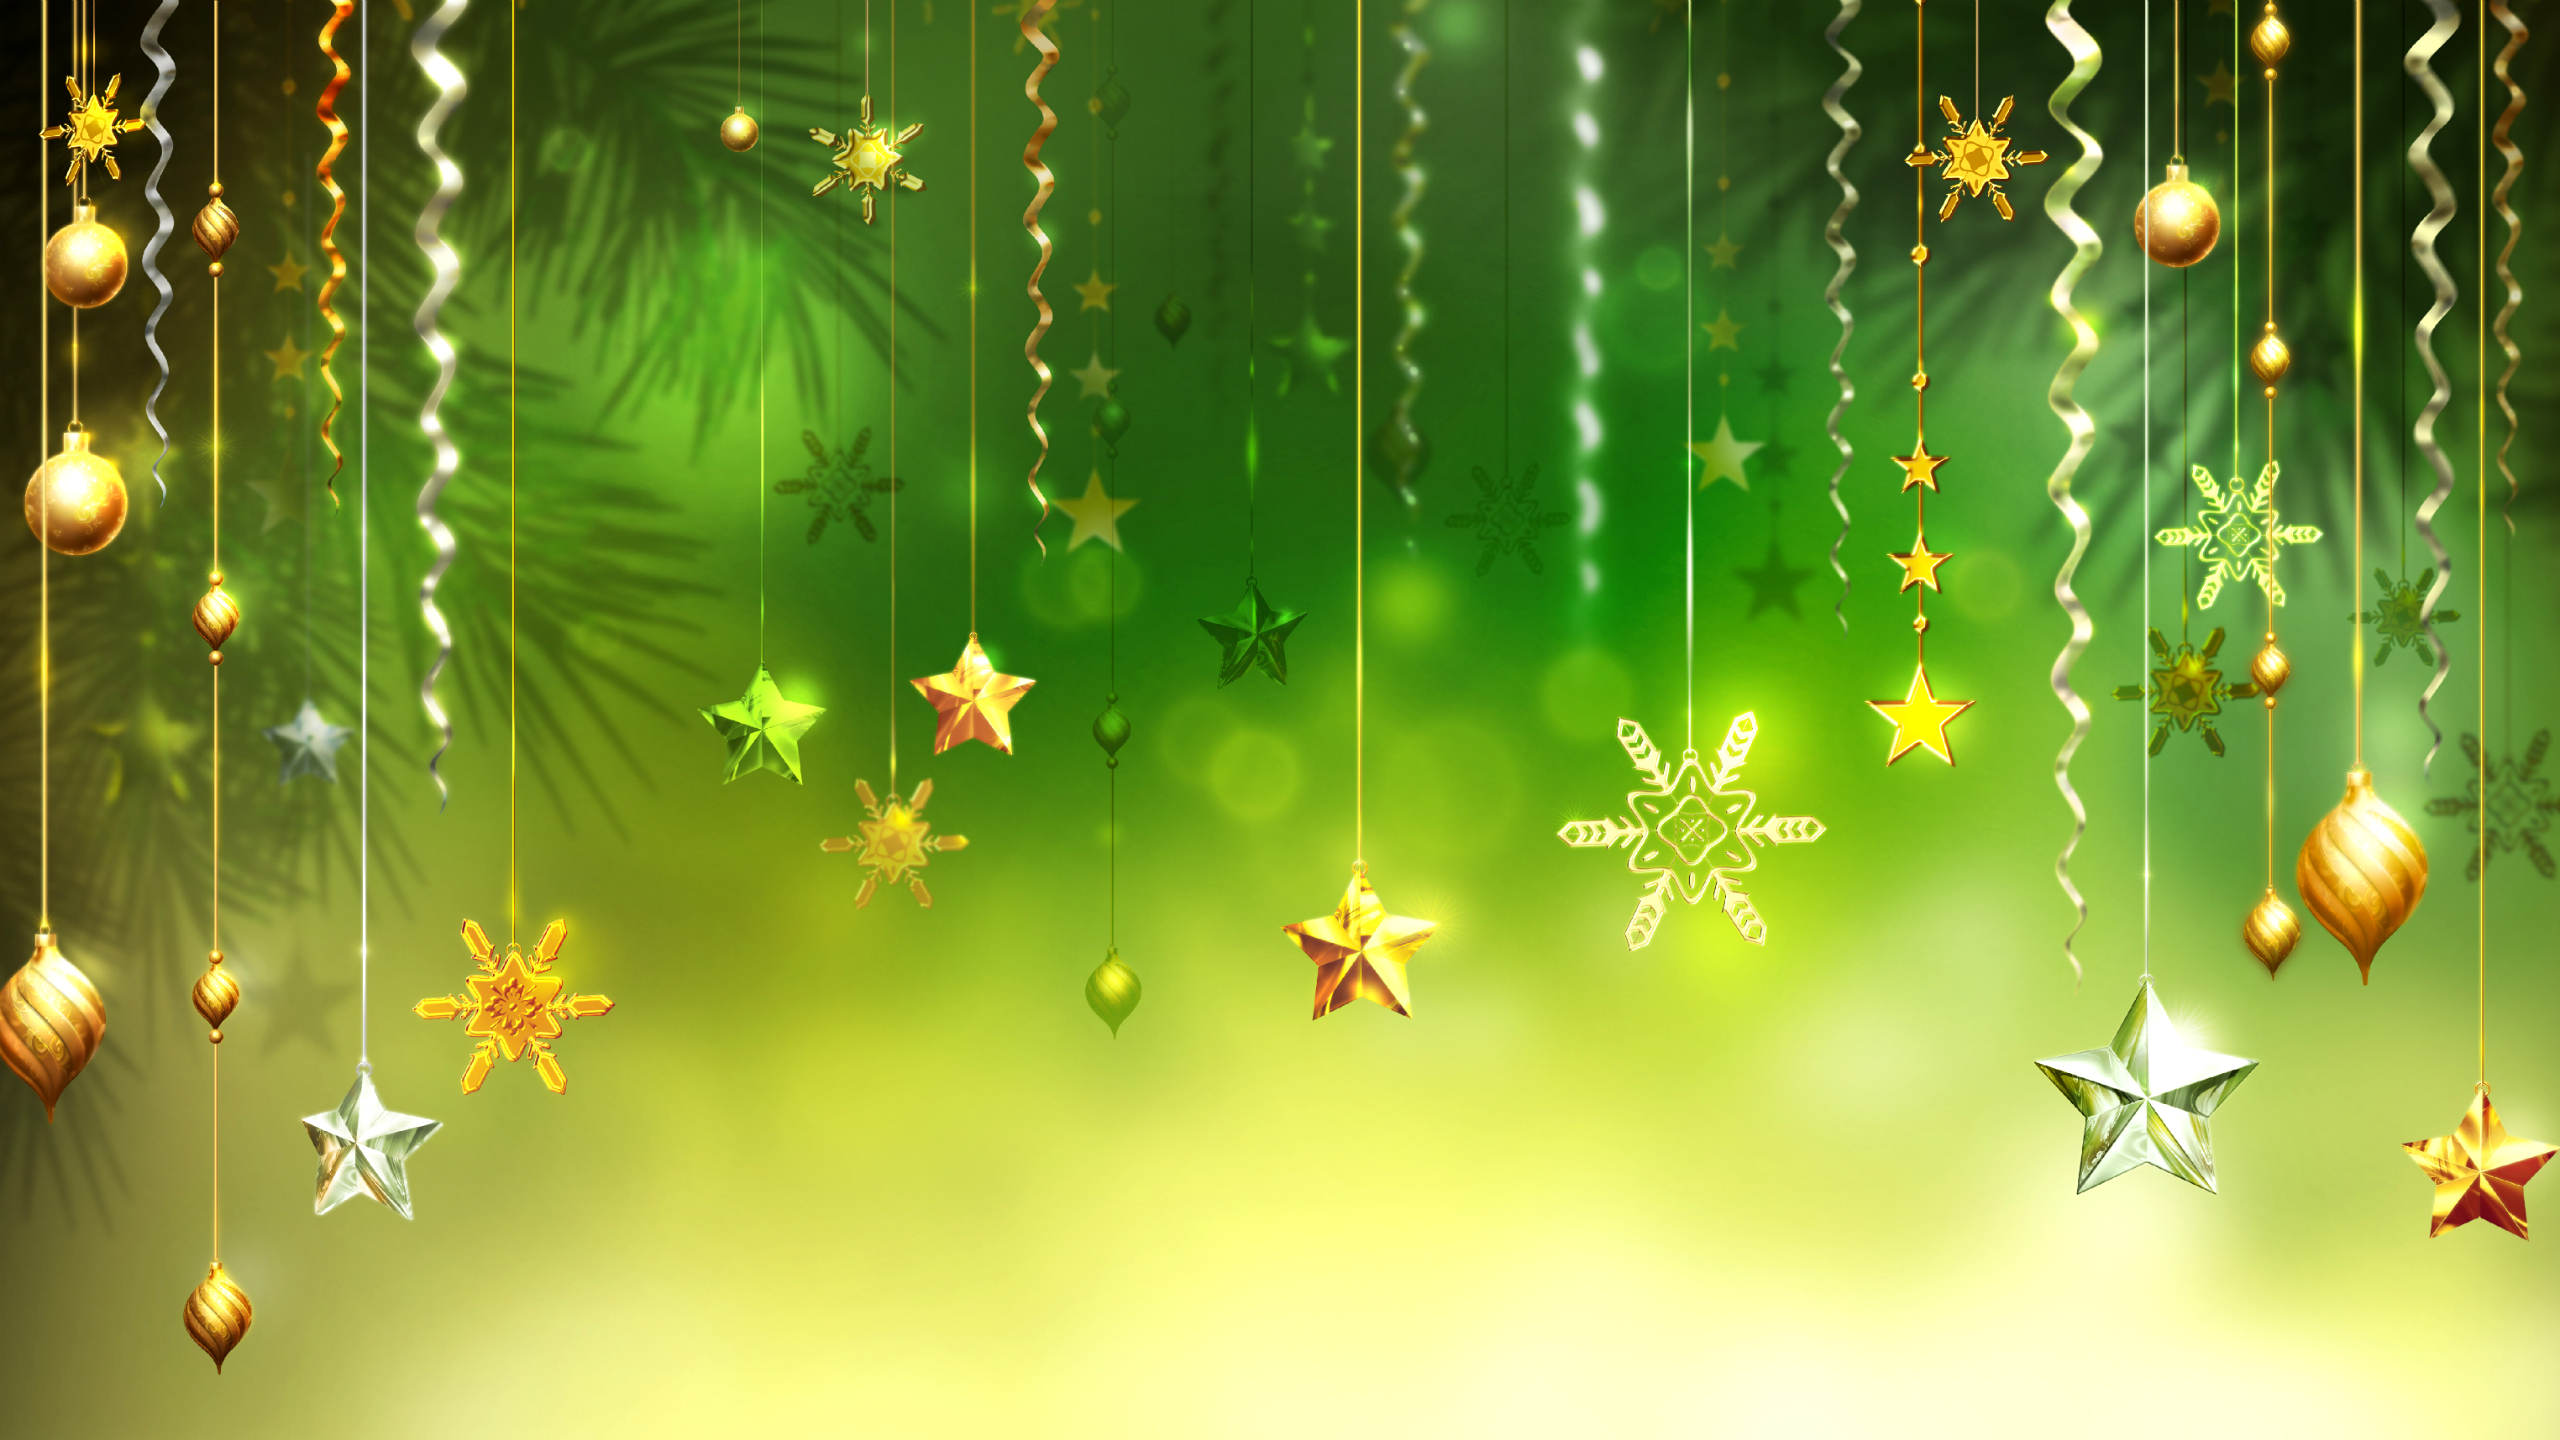 Christmas Green Background Stars Snowflakes Decorative Ornaments Pictures Wallpapers For Desktop